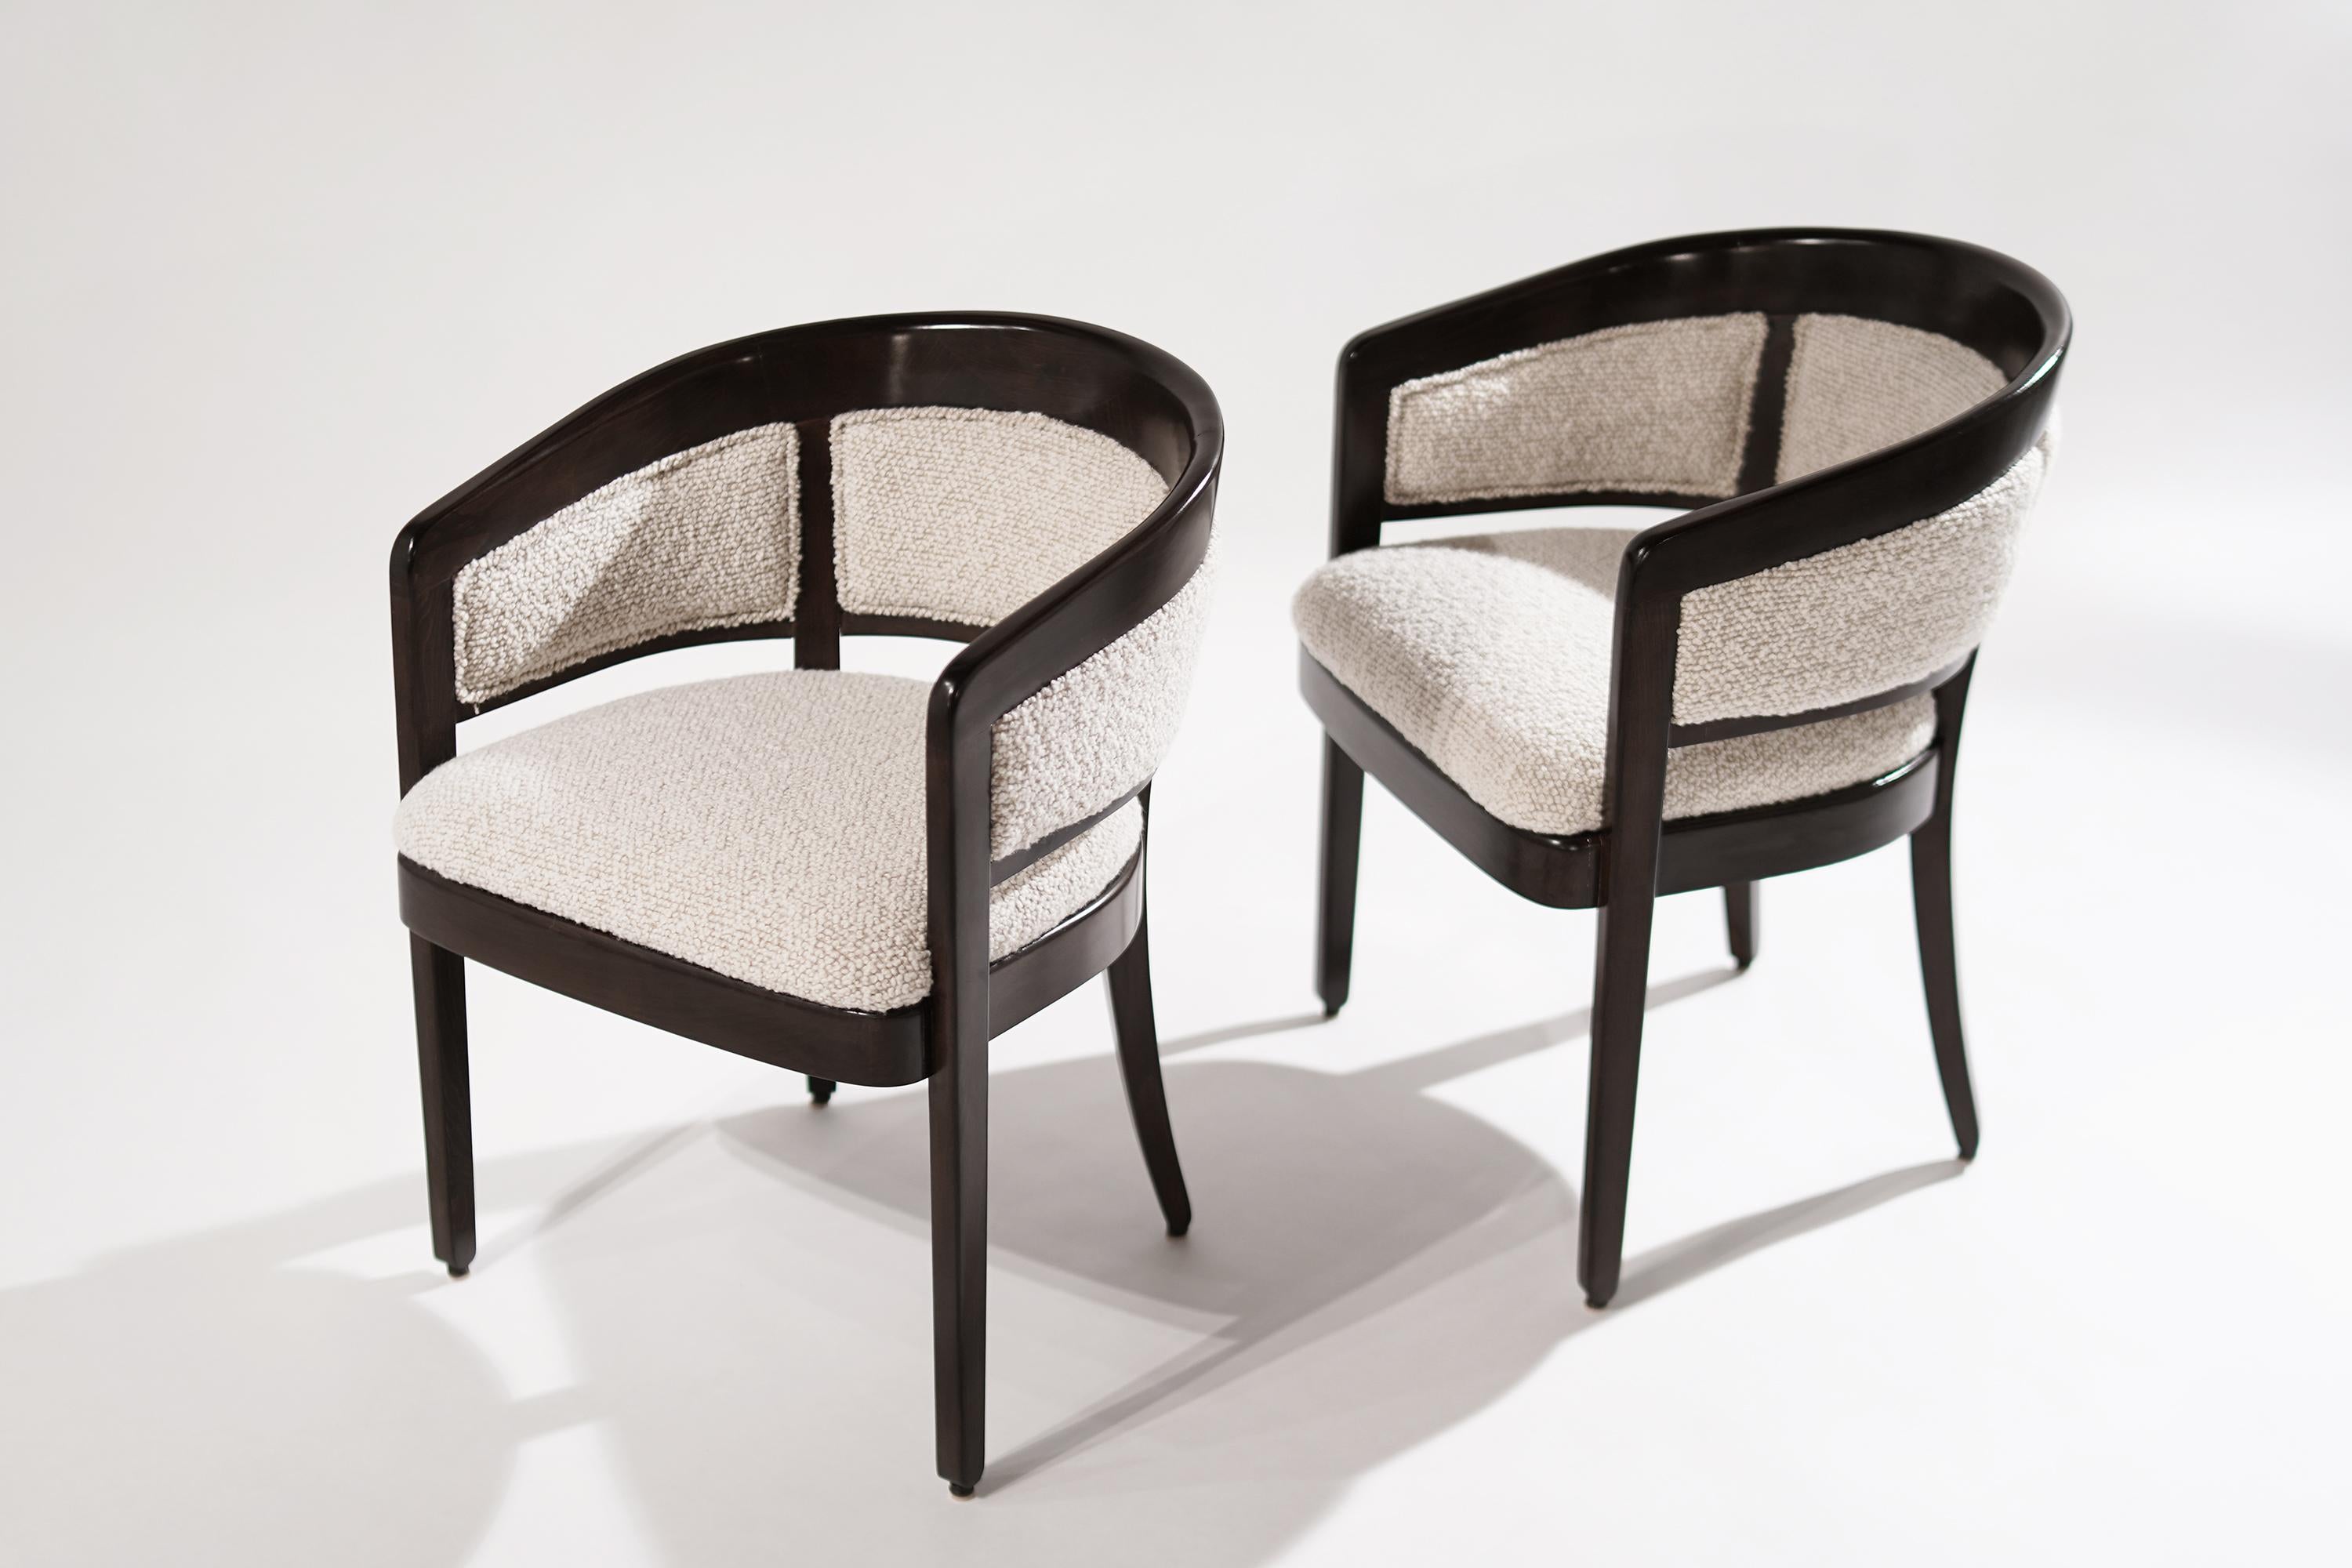 American Set of Armchairs in Wool Bouclé by Edward Wormley